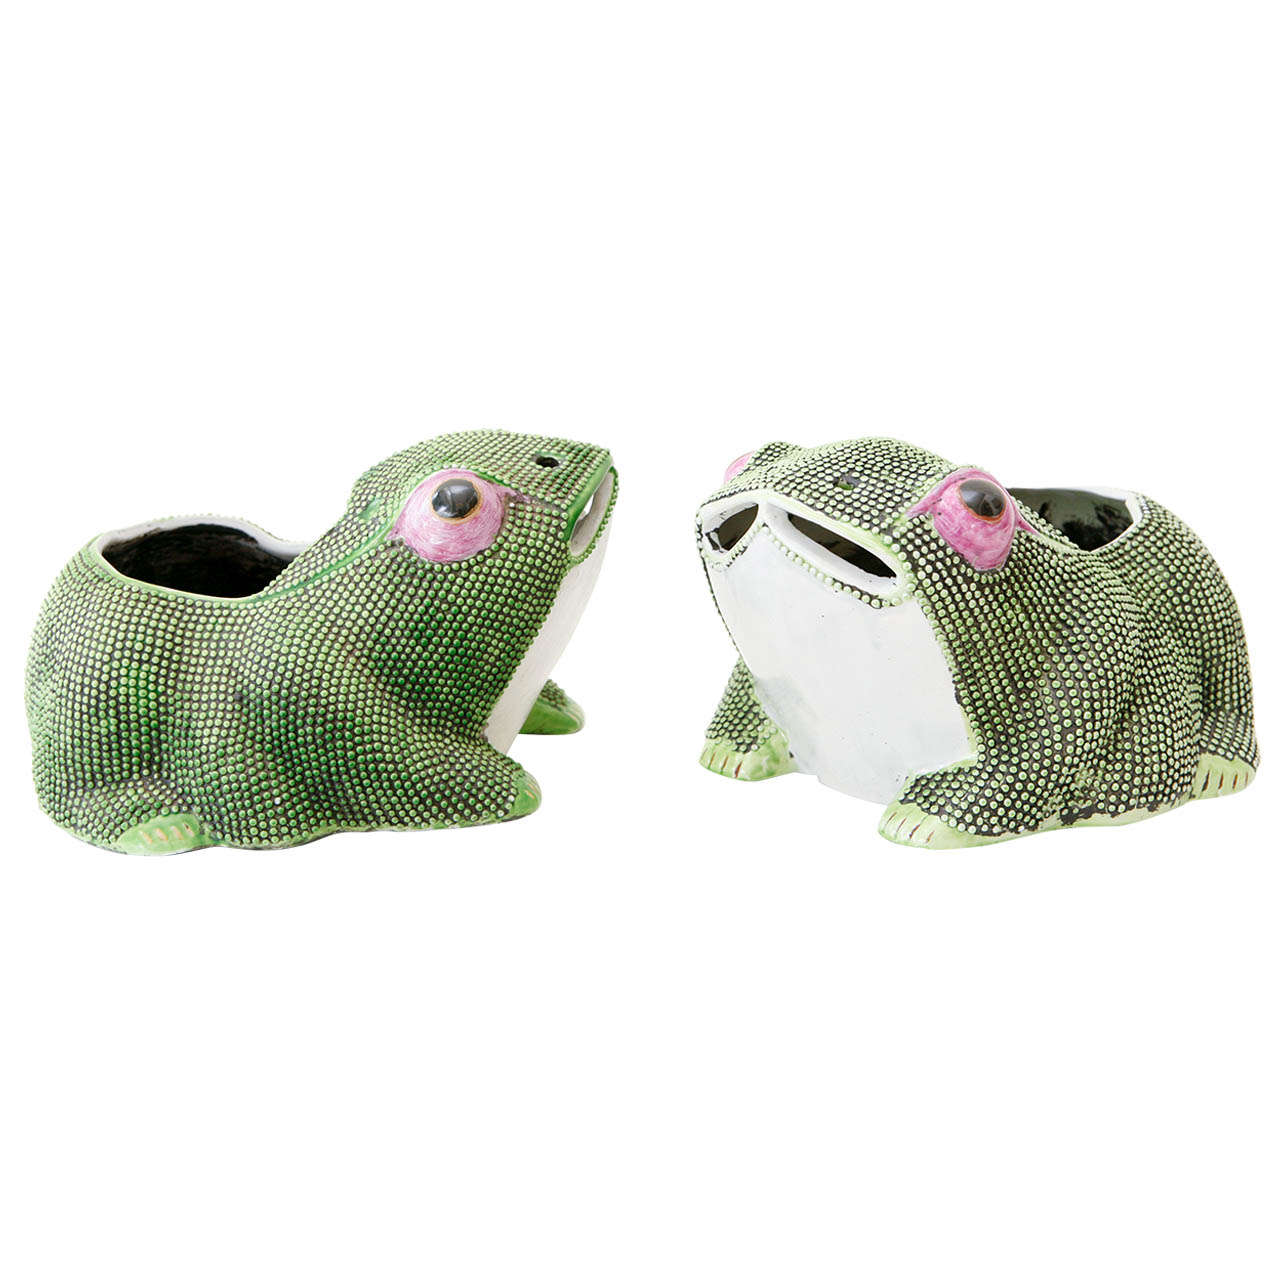 Pair of 19th Century Chinese Porcelain Frog Planters